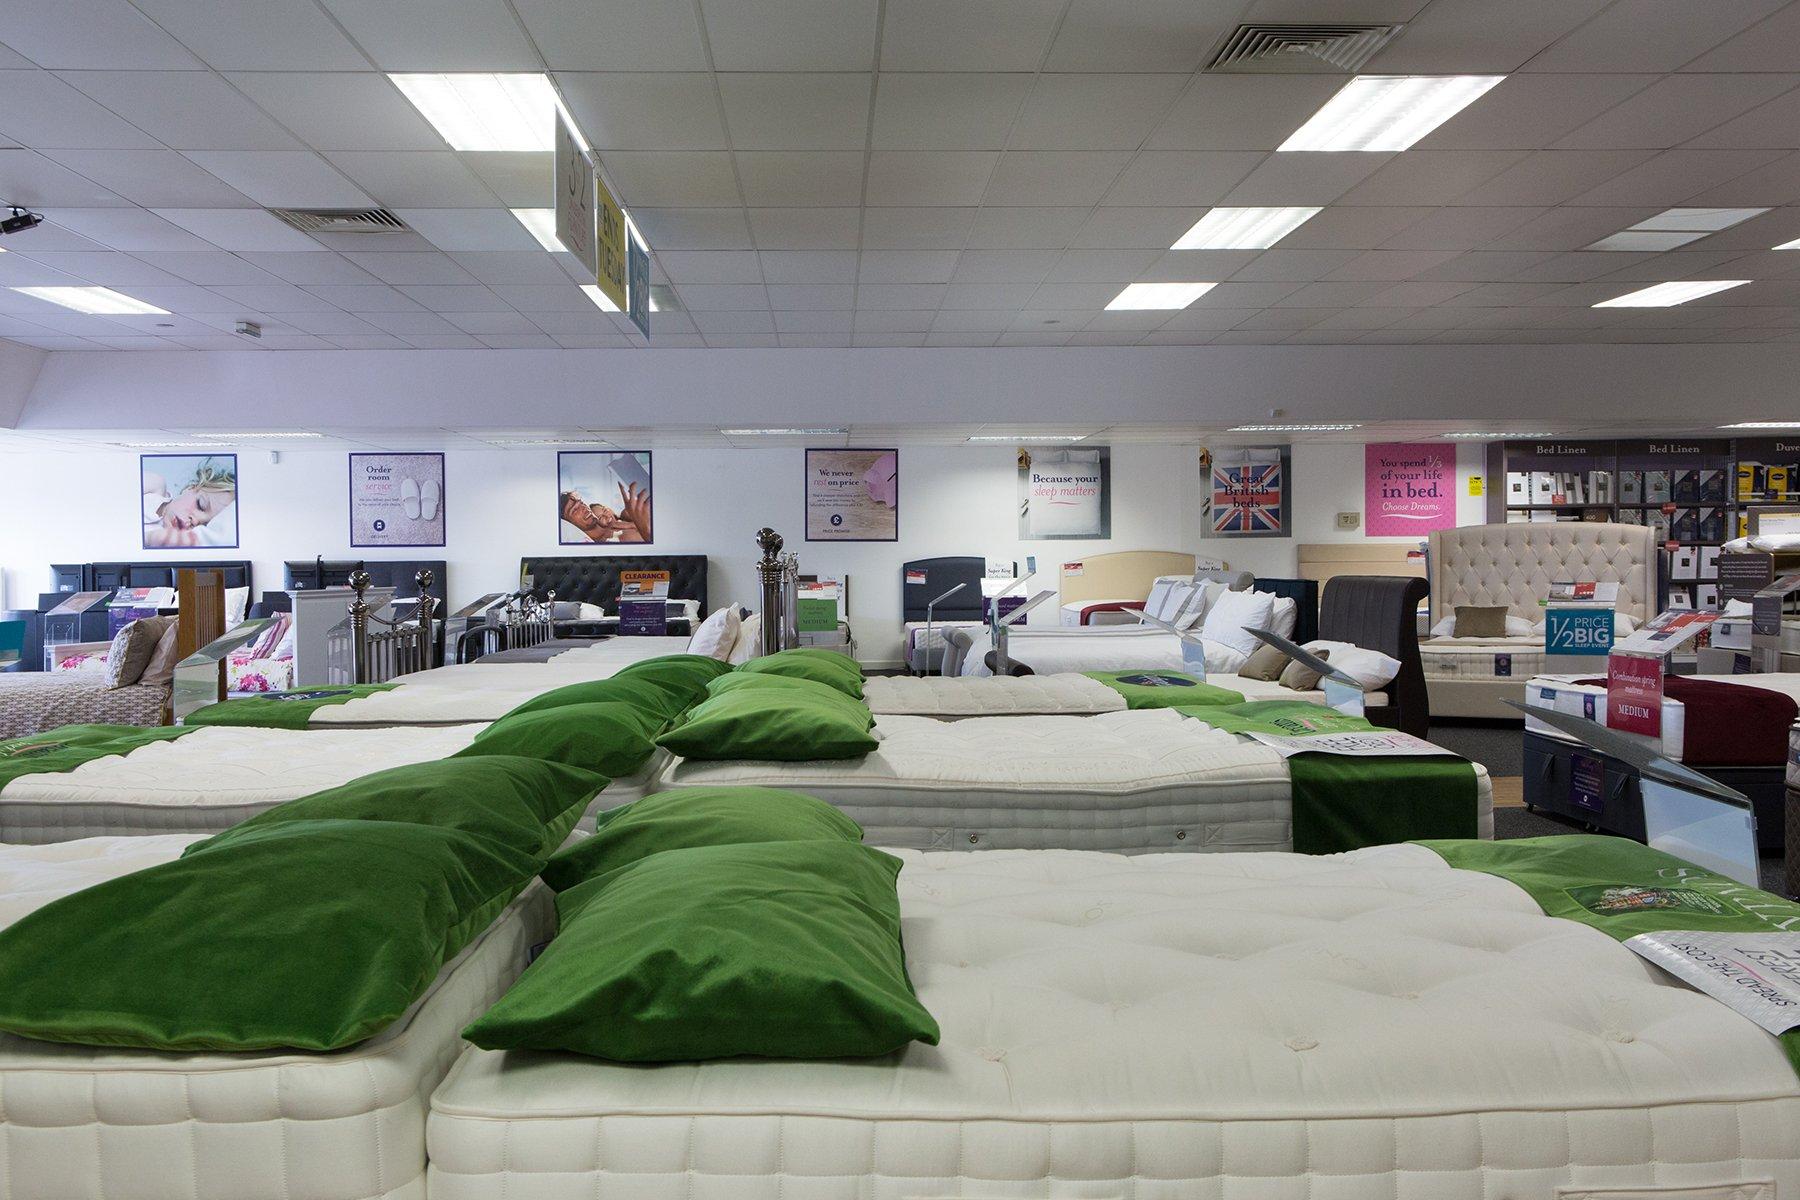 Dreams Ipswich - Furniture For Home And Office in Ipswich IP3 9SN - 192.com